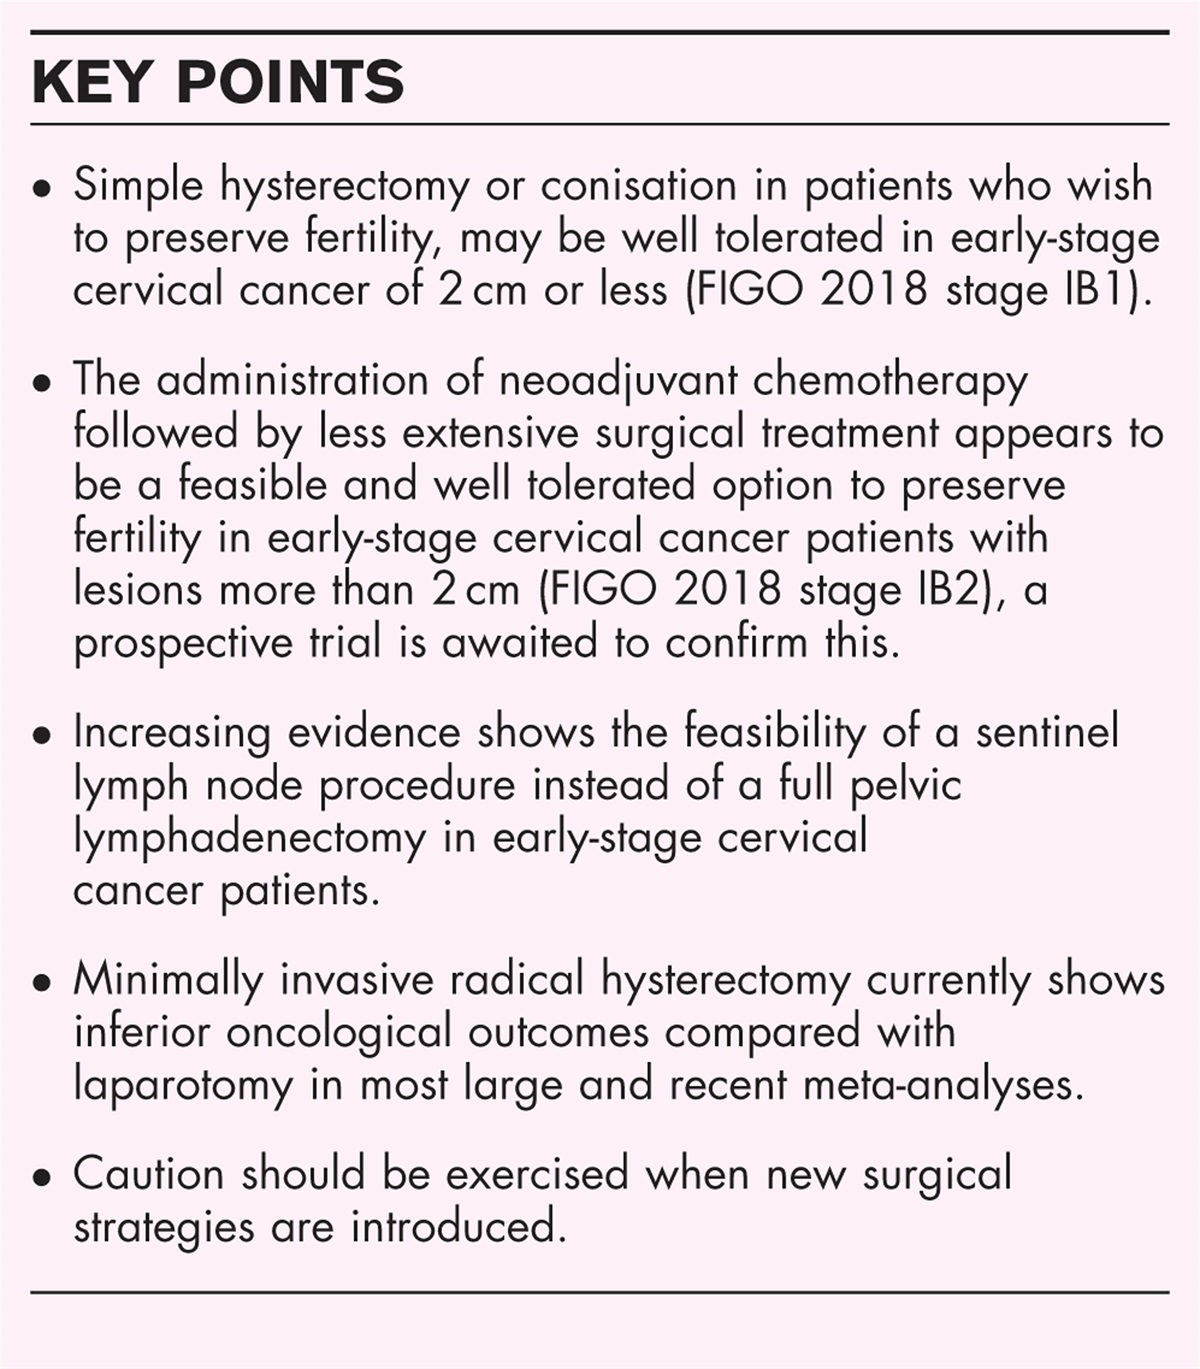 Is less more in the surgical treatment of early-stage cervical cancer?